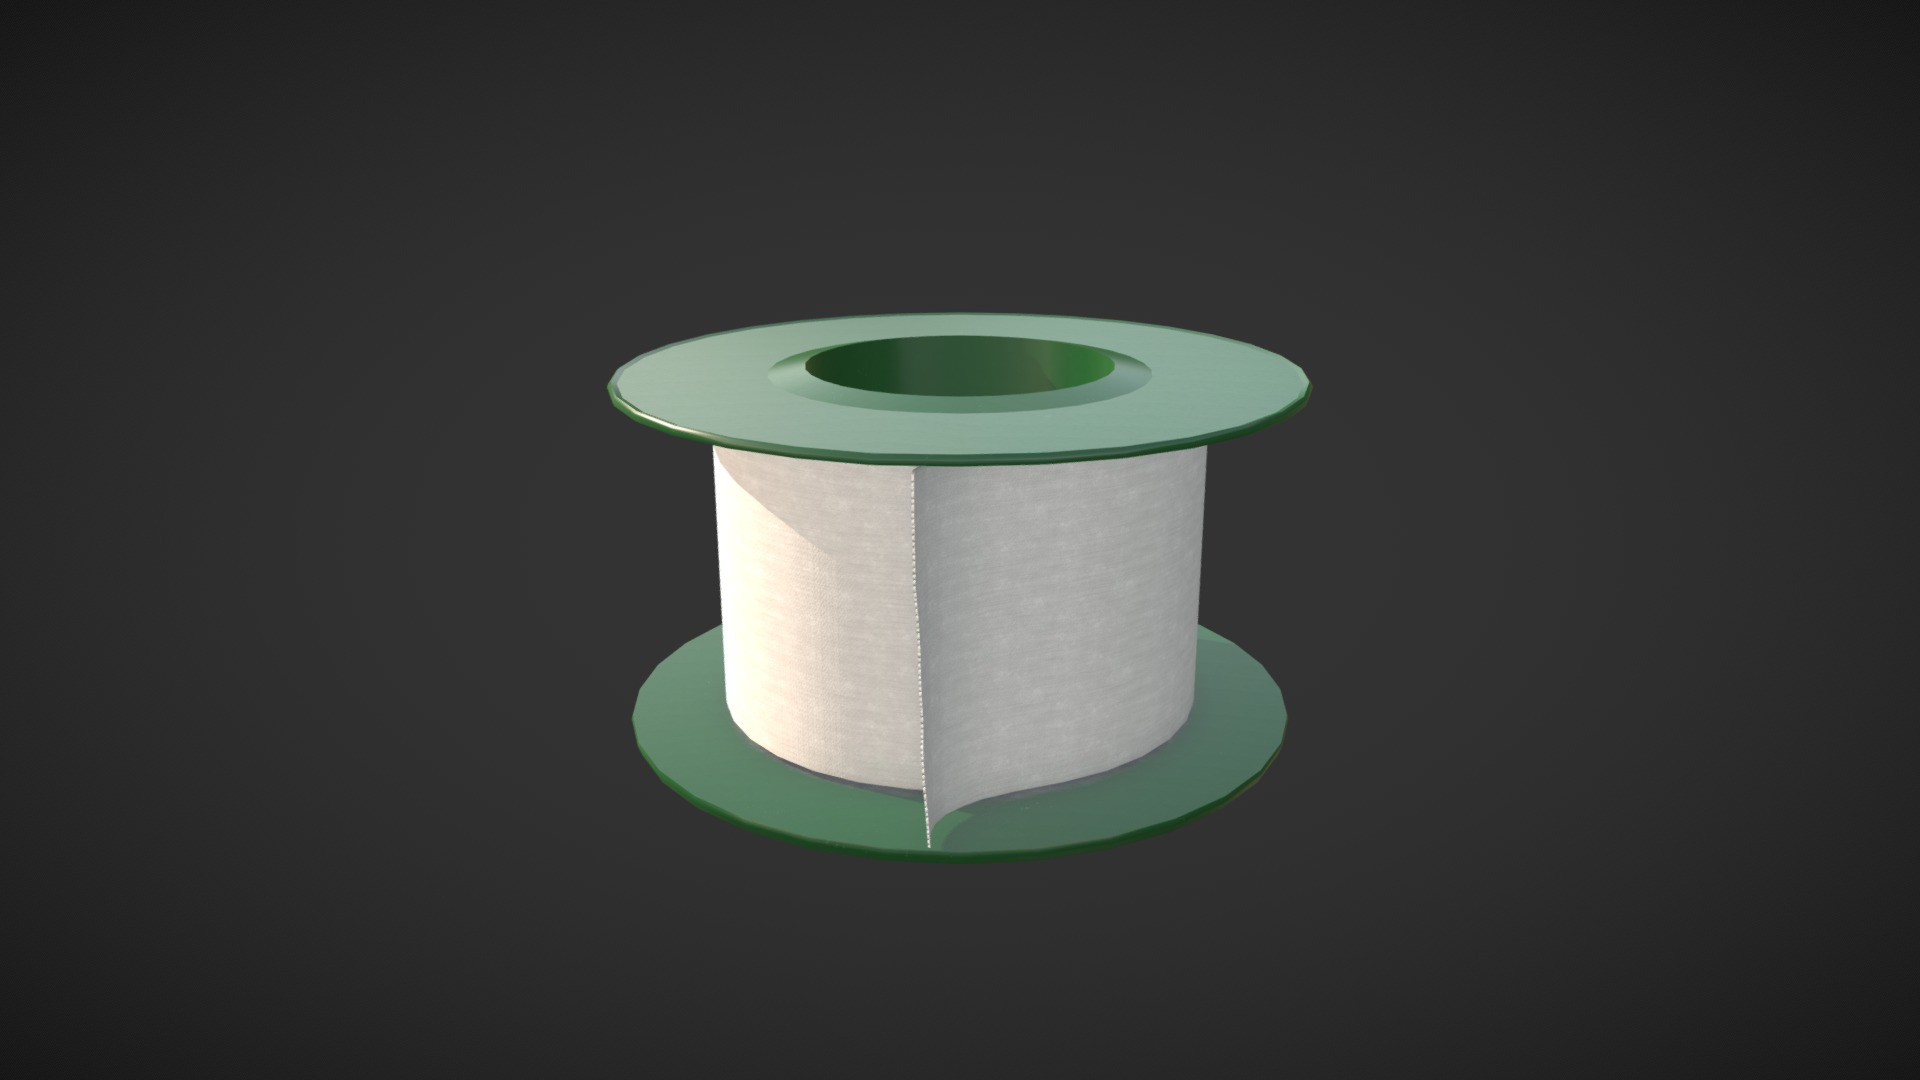 Model of a half-full roll of surgical tape with 2K PBR-textures built to real-world scale (metric system). Surgical tape (or medical tape) is a pressure-sensitive adhesive tape used in surgury, medicine and first aid.

The model was created using Blender and Substance Painter. The model is UV-mapped and has two different materials.

The zip-file “Surgical tape.zip” contains all the textures as png-files with a resolution of 2048 x 2048 pixels (8 bits), as well as the model in the following file formats:

Autodesk FBX 3.9.1 (.fbx)

OBJ 2.3.6 (.obj &amp; .mtl)

Collada 1.4.1 (.dae)

3D Studio 1.0.0 (.3ds)

Blender v2.79 (.blend) - Surgical tape - Buy Royalty Free 3D model by Vertex-Design 3d model